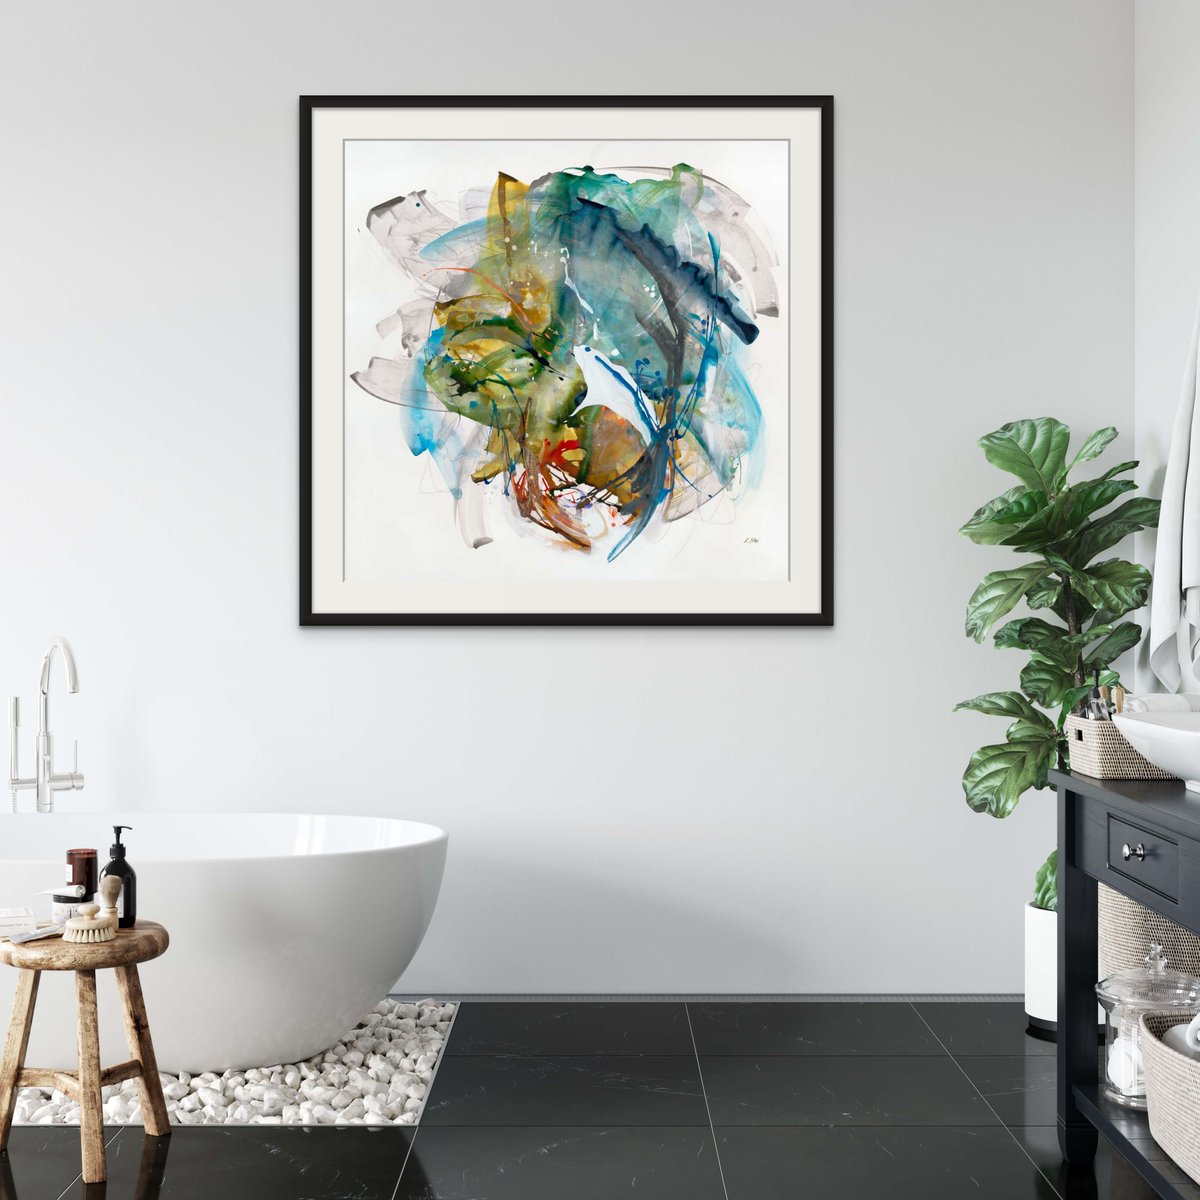 Creating your own relaxing oasis with a spa-like bathroom can be just what you need after a long day! Adding luxurious elements, natural materials and personal touches can help create your dreamy haven! #spabathroom #bathroomdesign #interiordesign #wallart #artdecor #decortrend